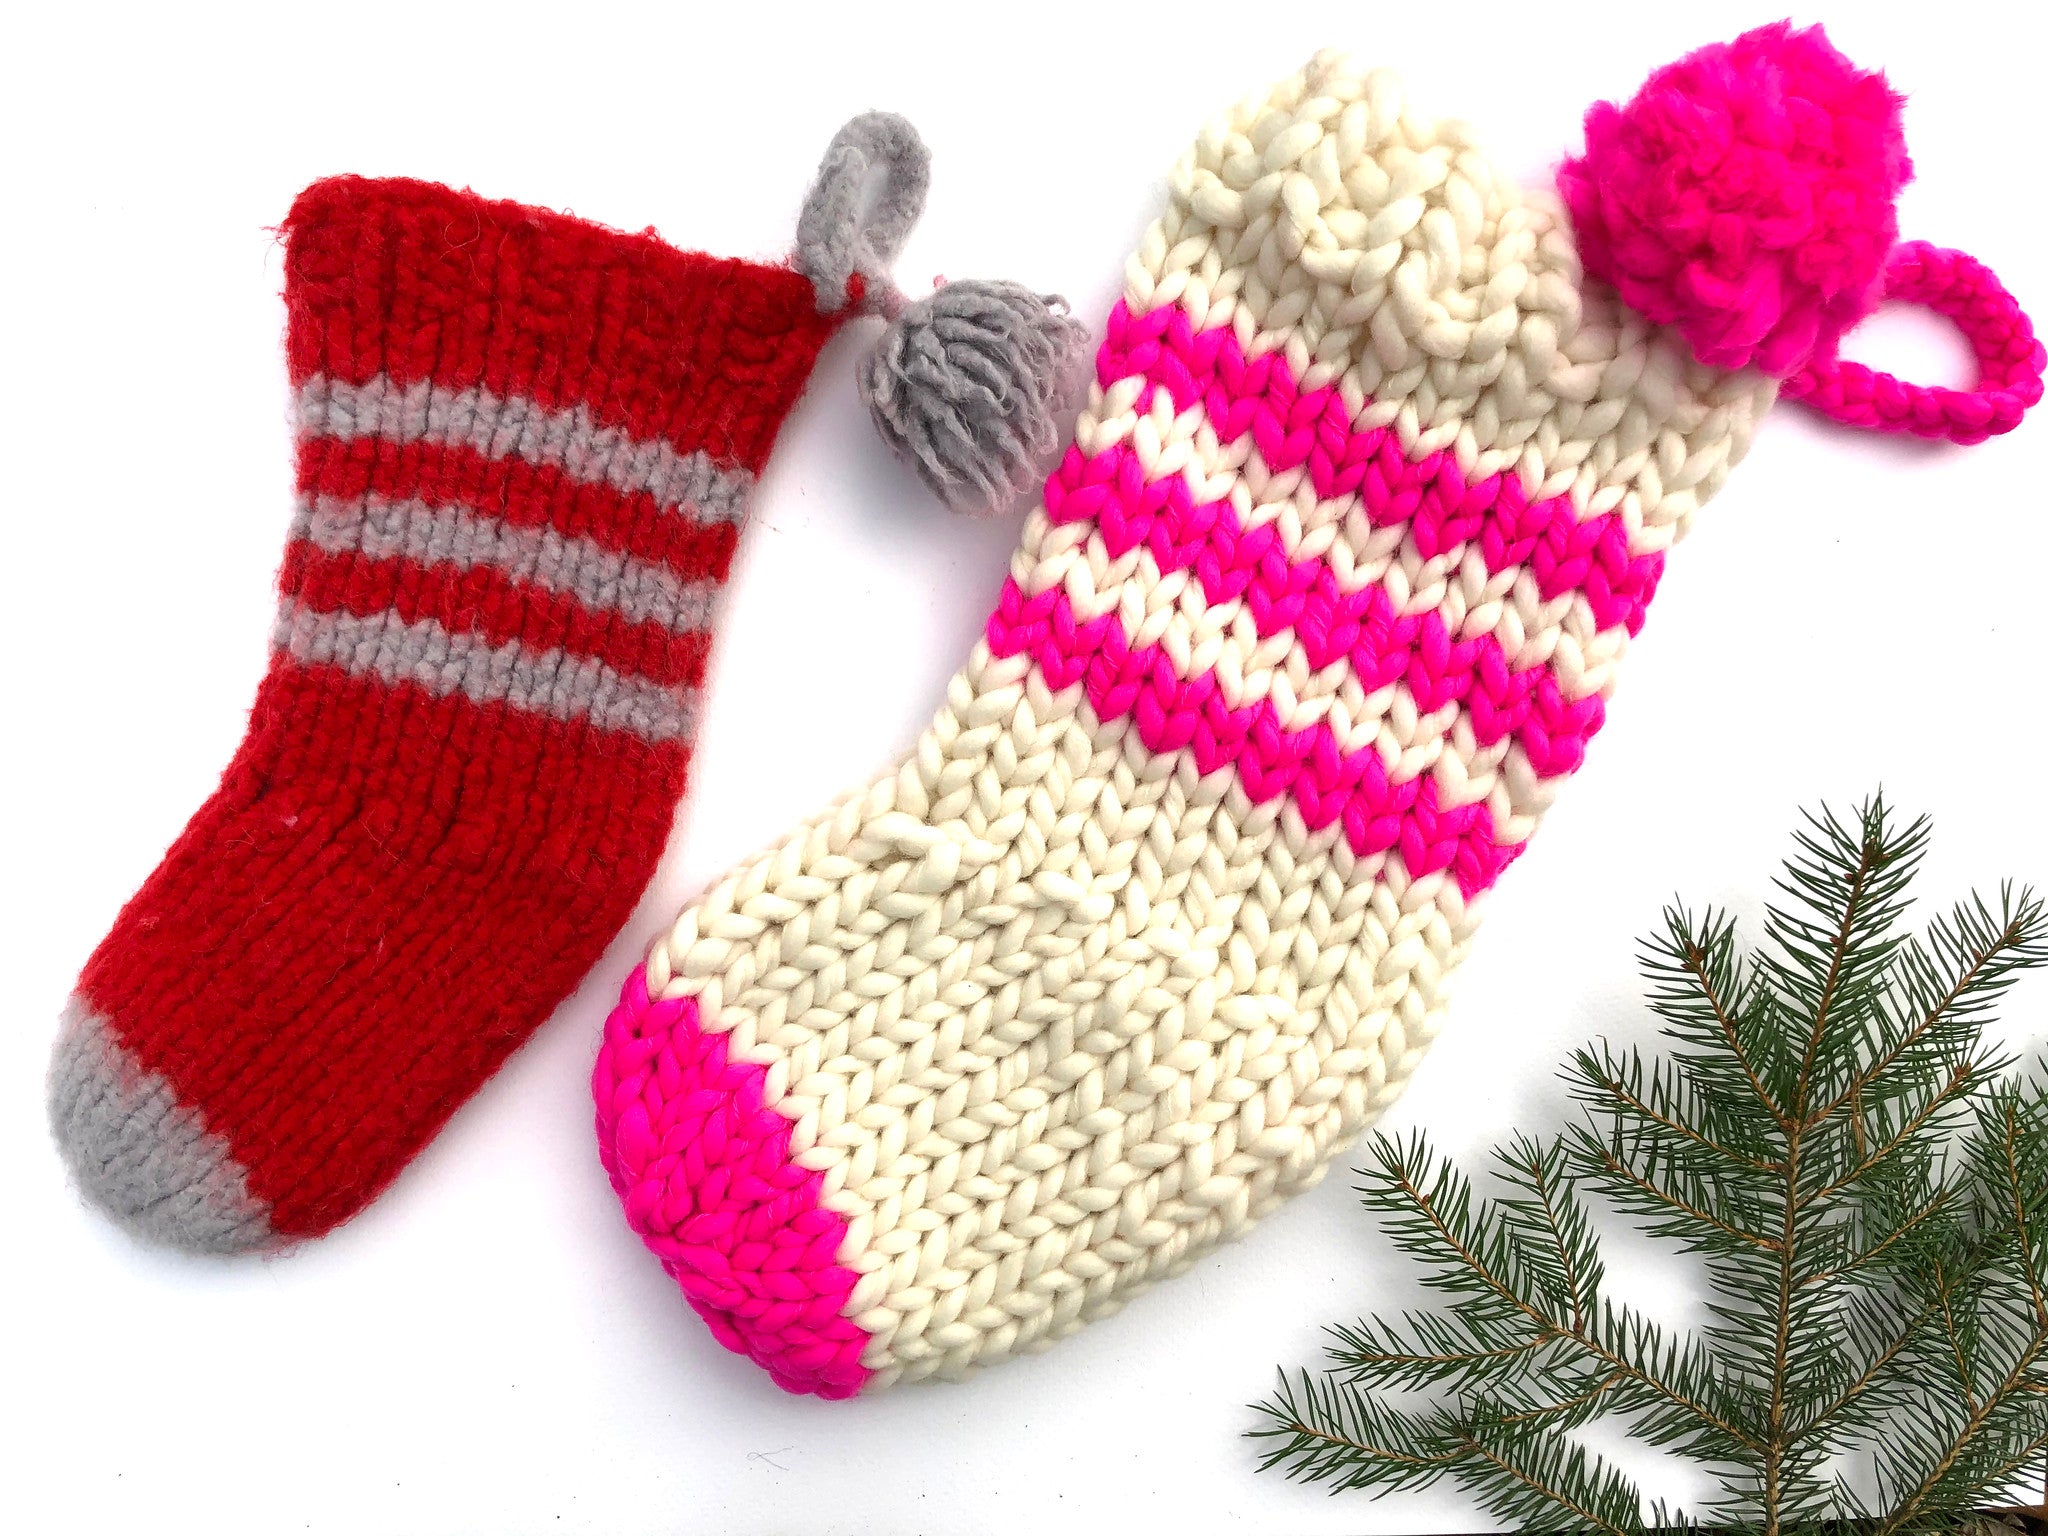 Christmas Stockings - Merino No. 5 AND Ornaments - Dream (Worsted)- PATTERNS